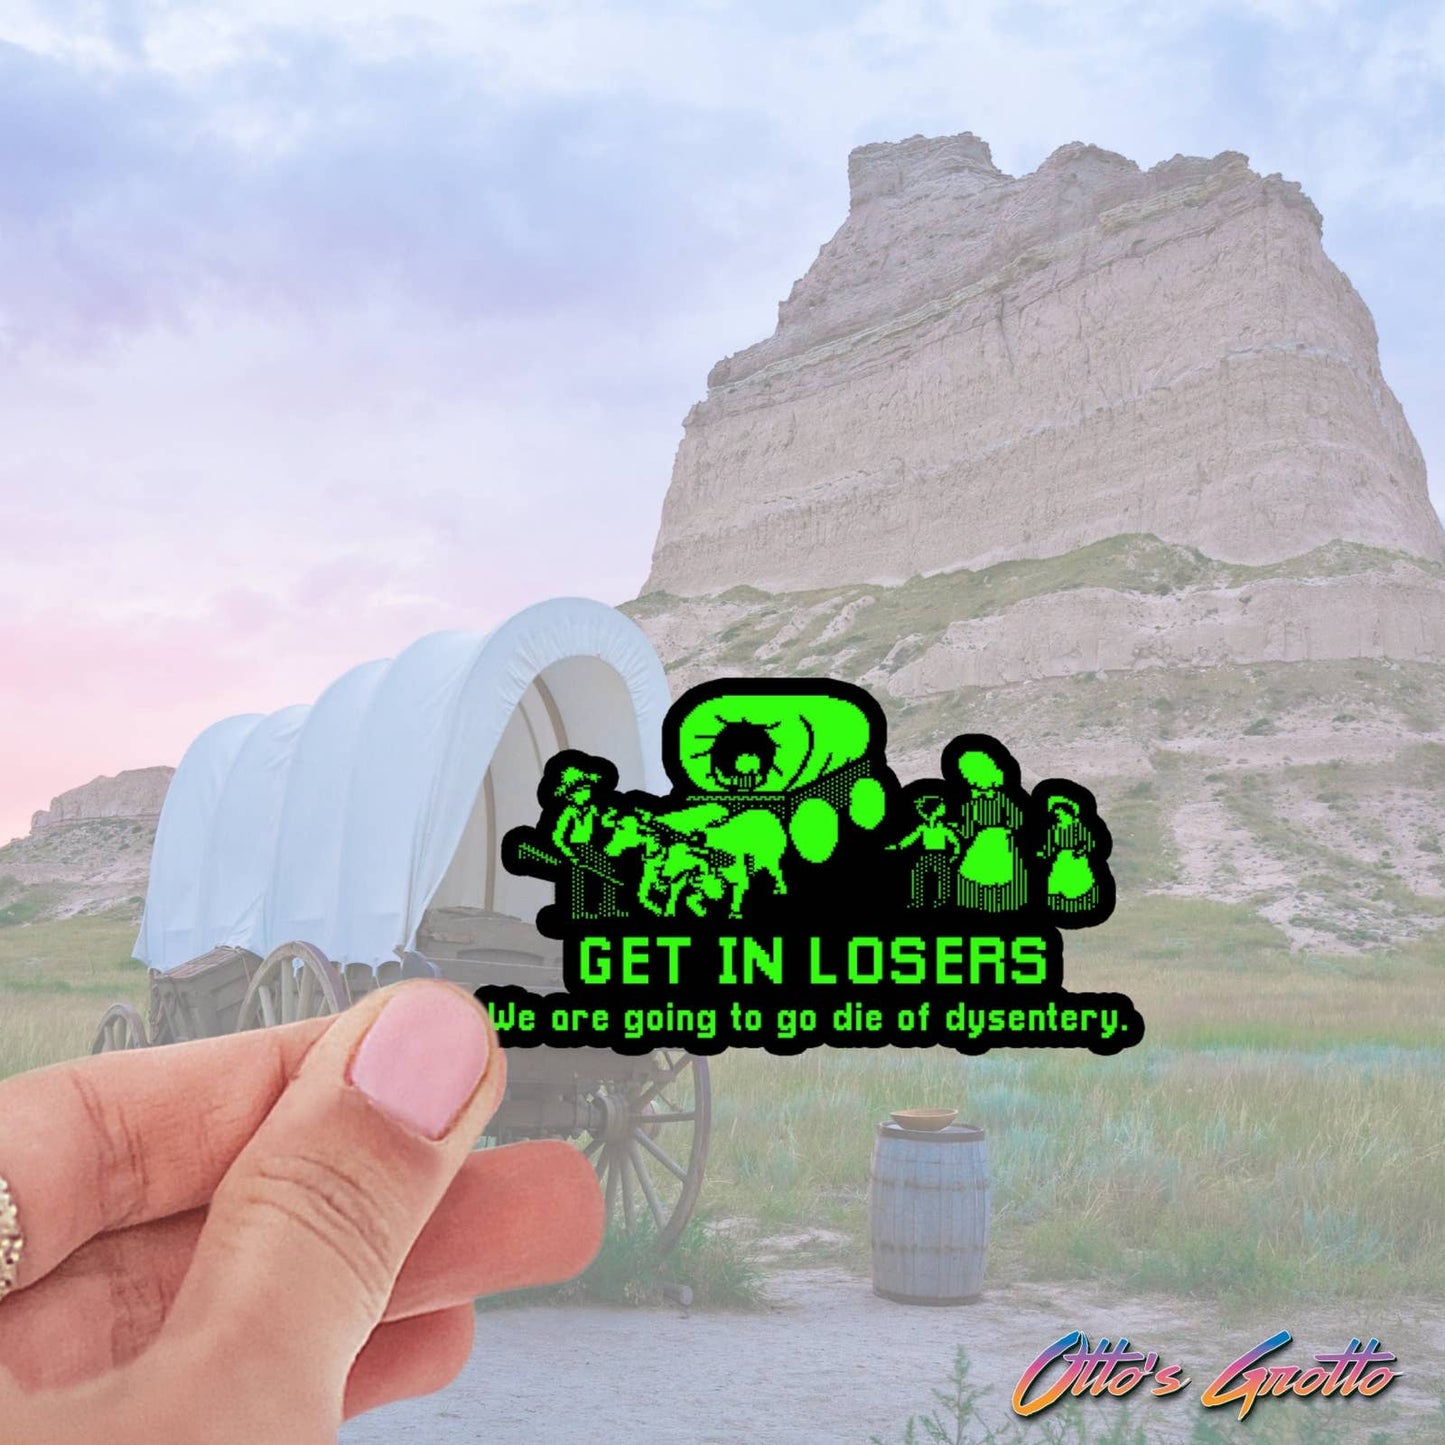 Oregon Trail - Get In Losers Sticker Eighties Sticker 1980s Sticker Retro Gaming Sticker Funny Decal for Eighties Kids